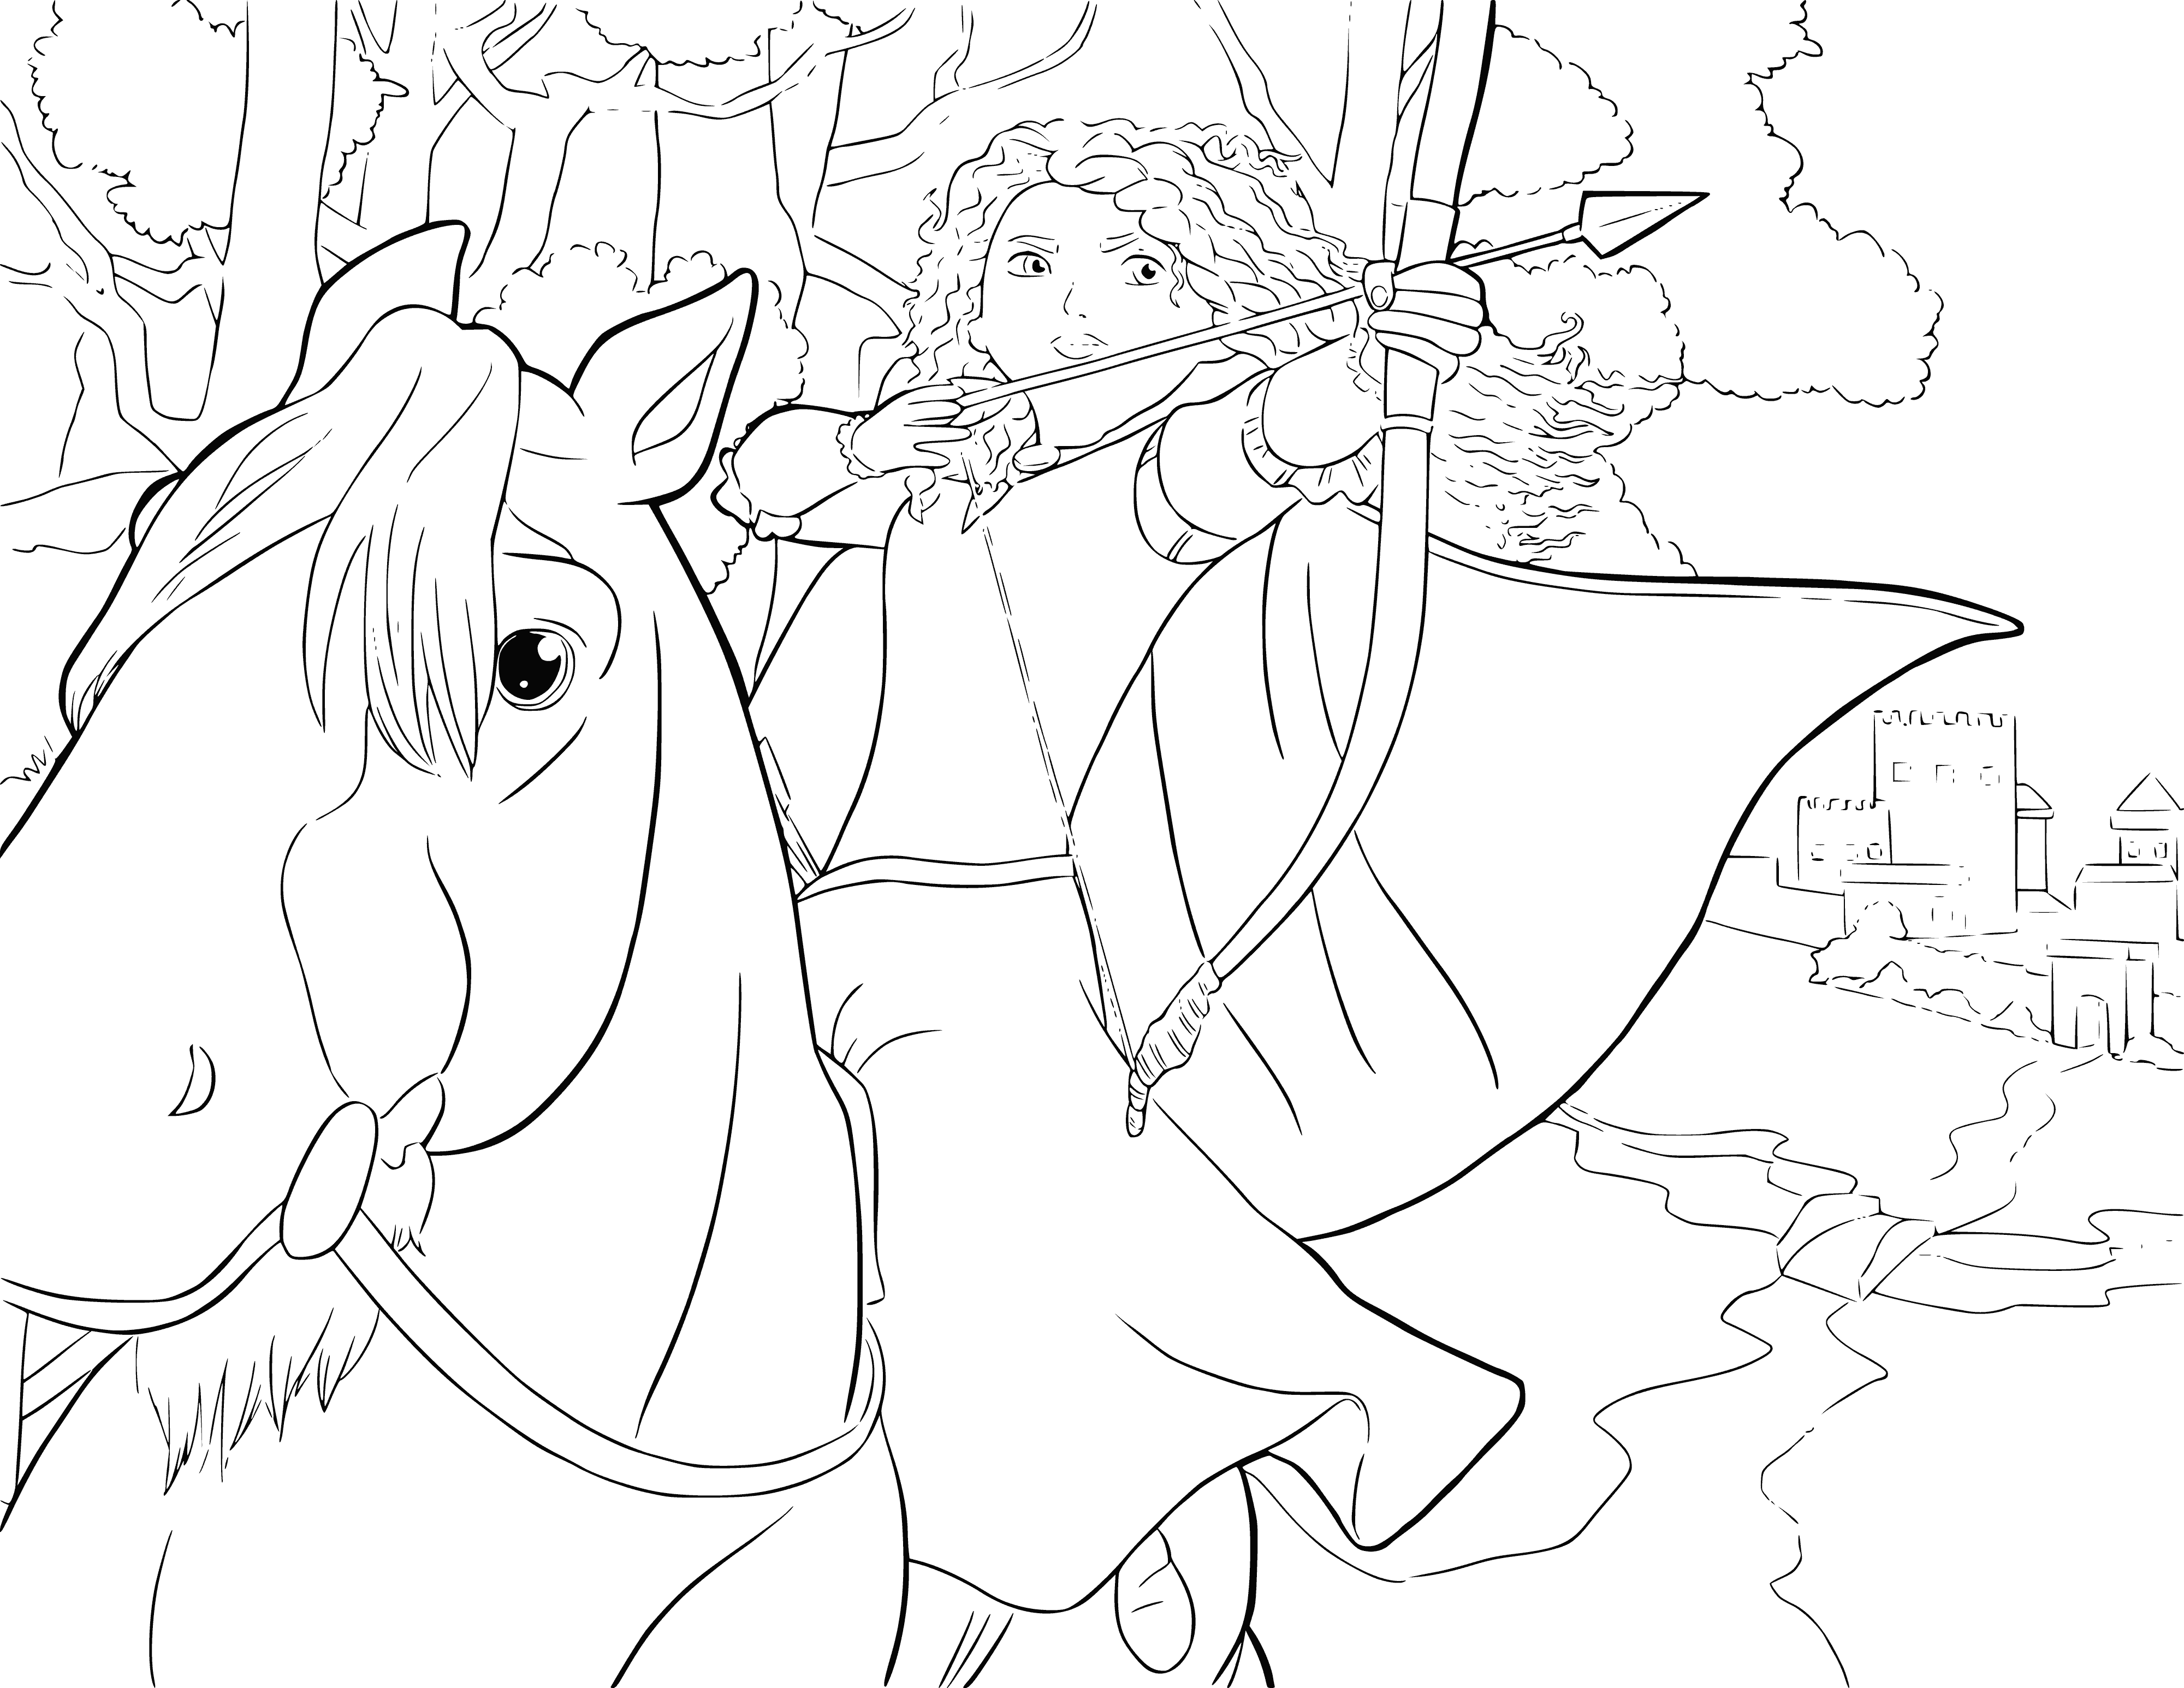 Merida with a bow in her hands coloring page